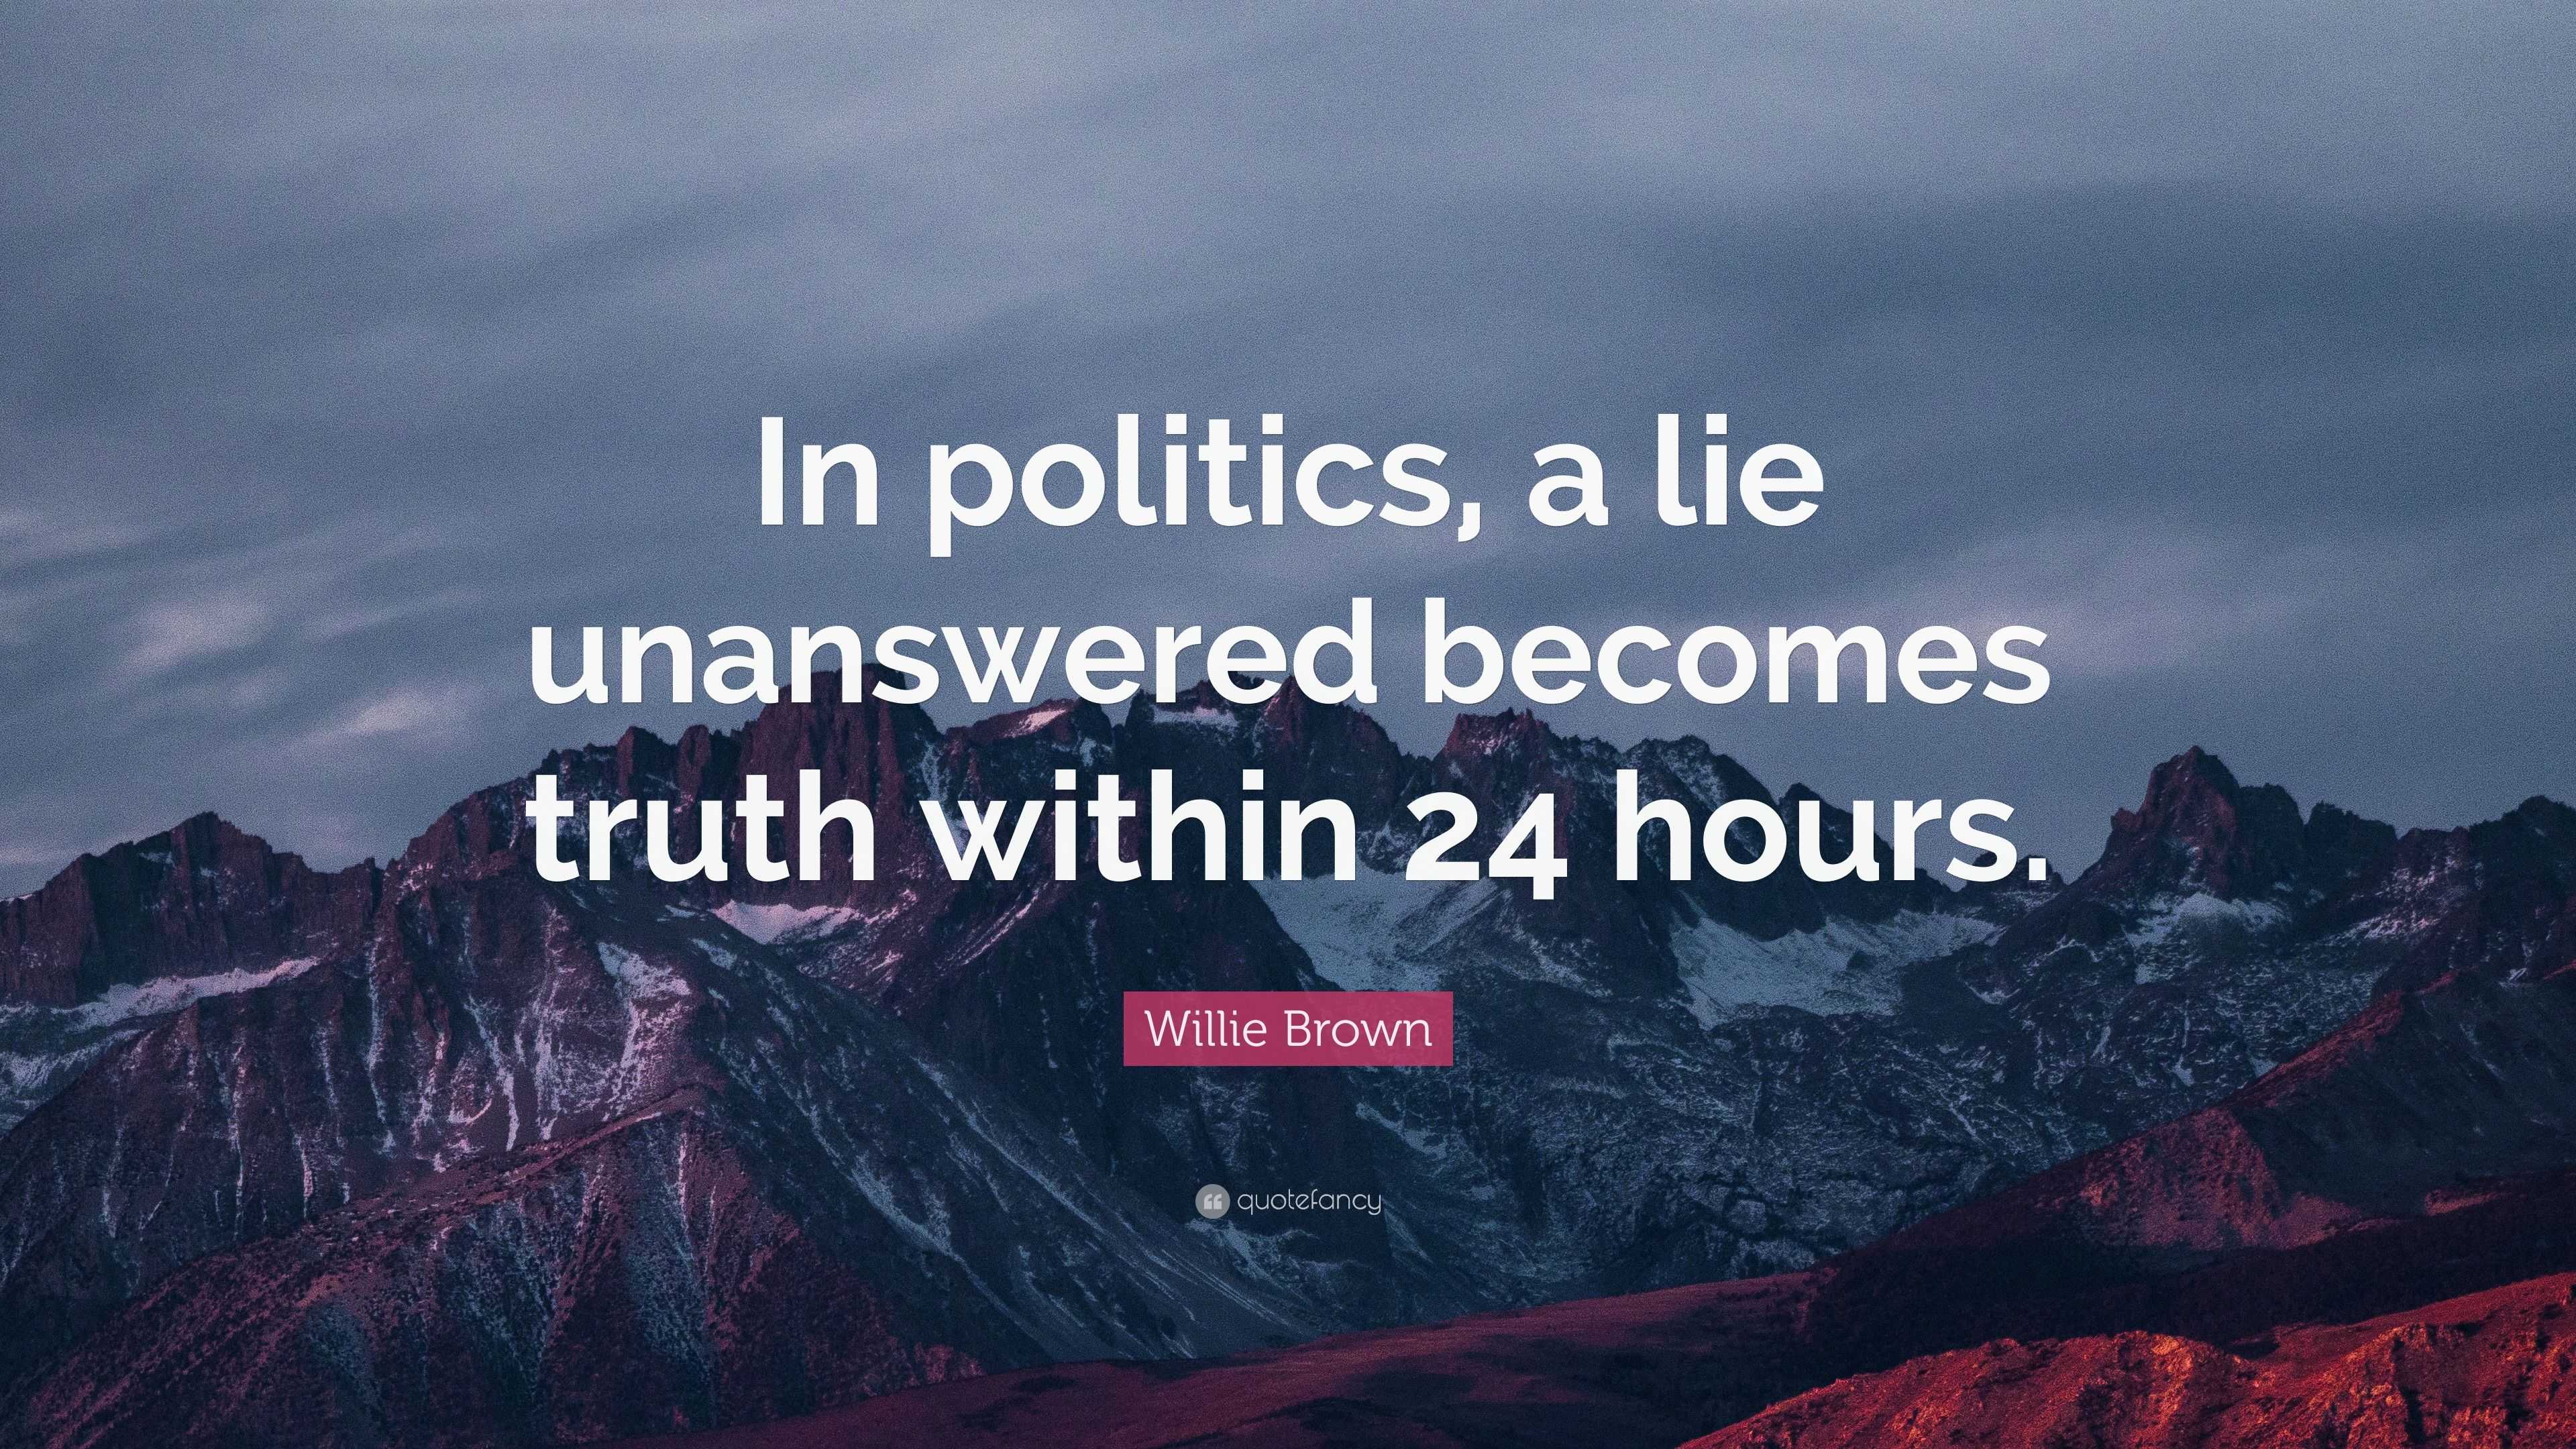 Willie Brown Quote “in Politics A Lie Unanswered Becomes Truth Within 24 Hours” 